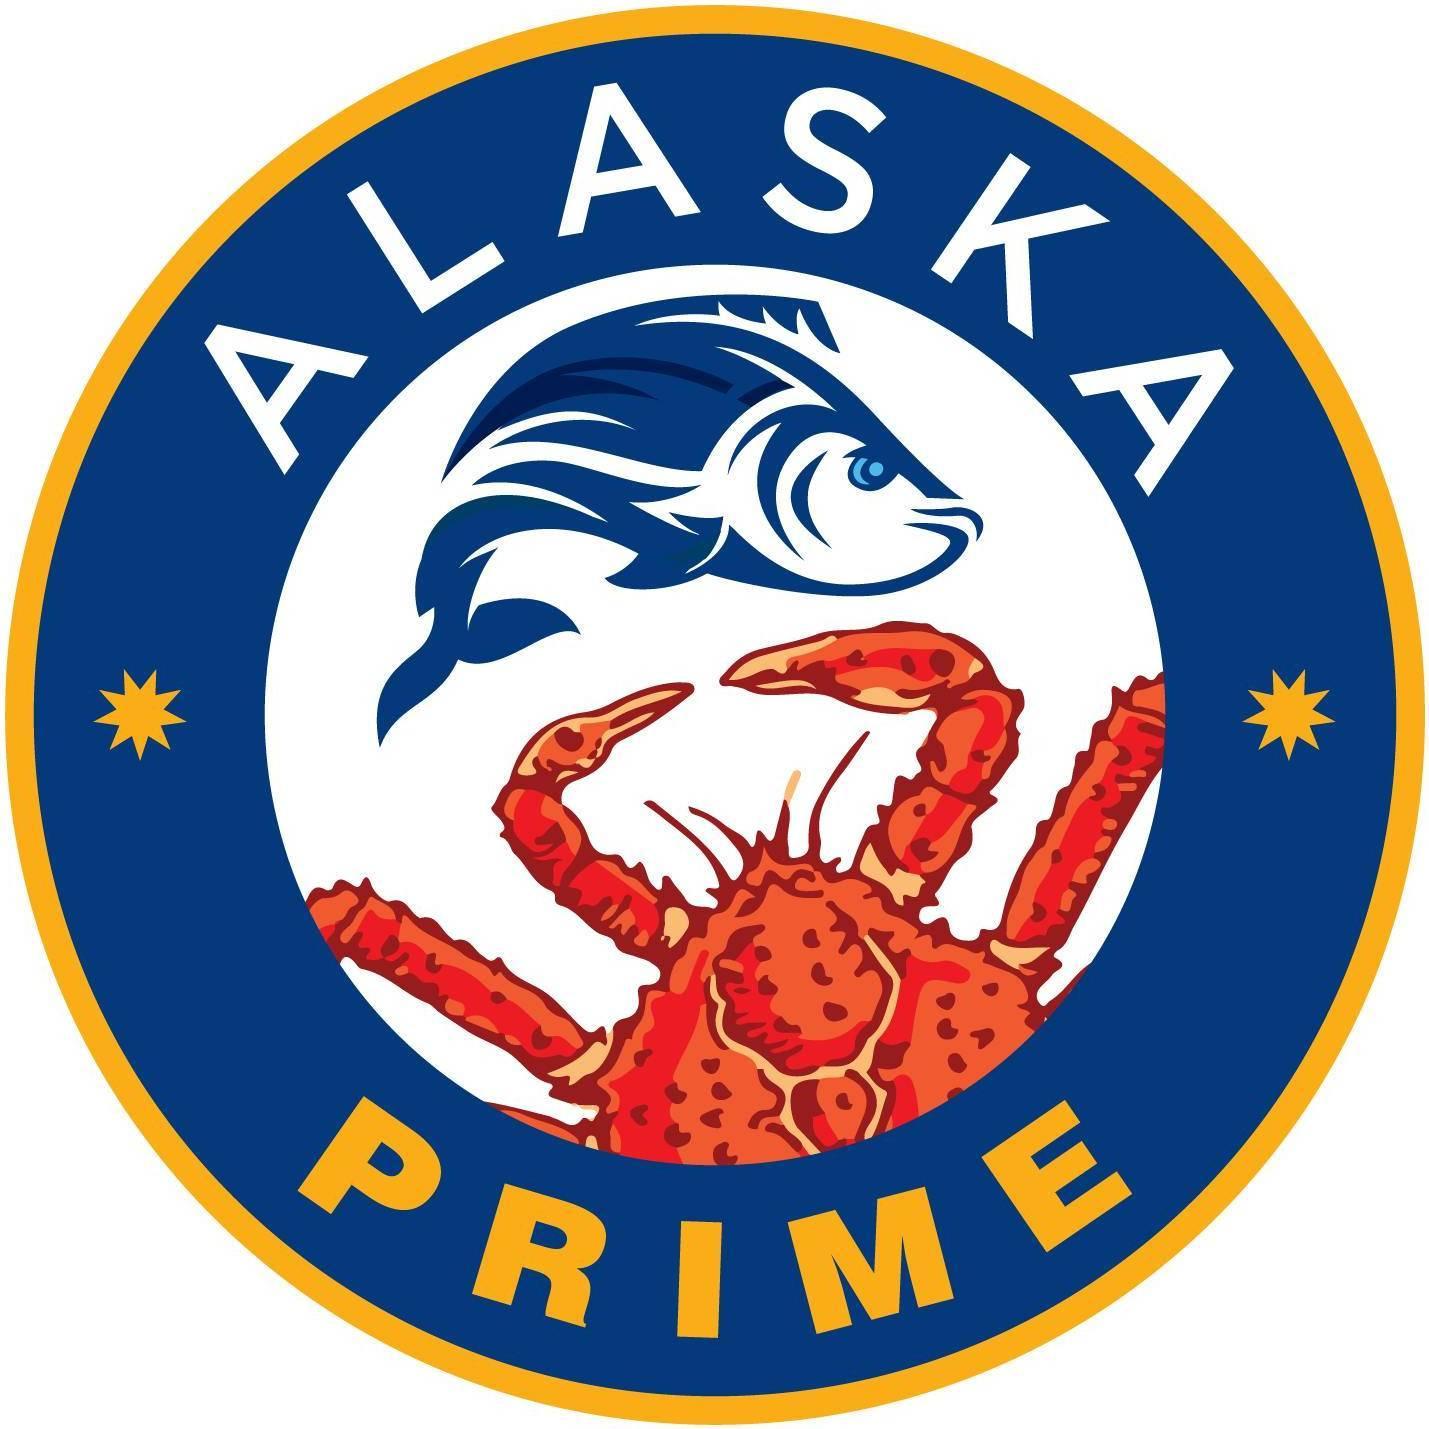 Latest Công Ty TNHH The Alaska Prime employment/hiring with high salary & attractive benefits